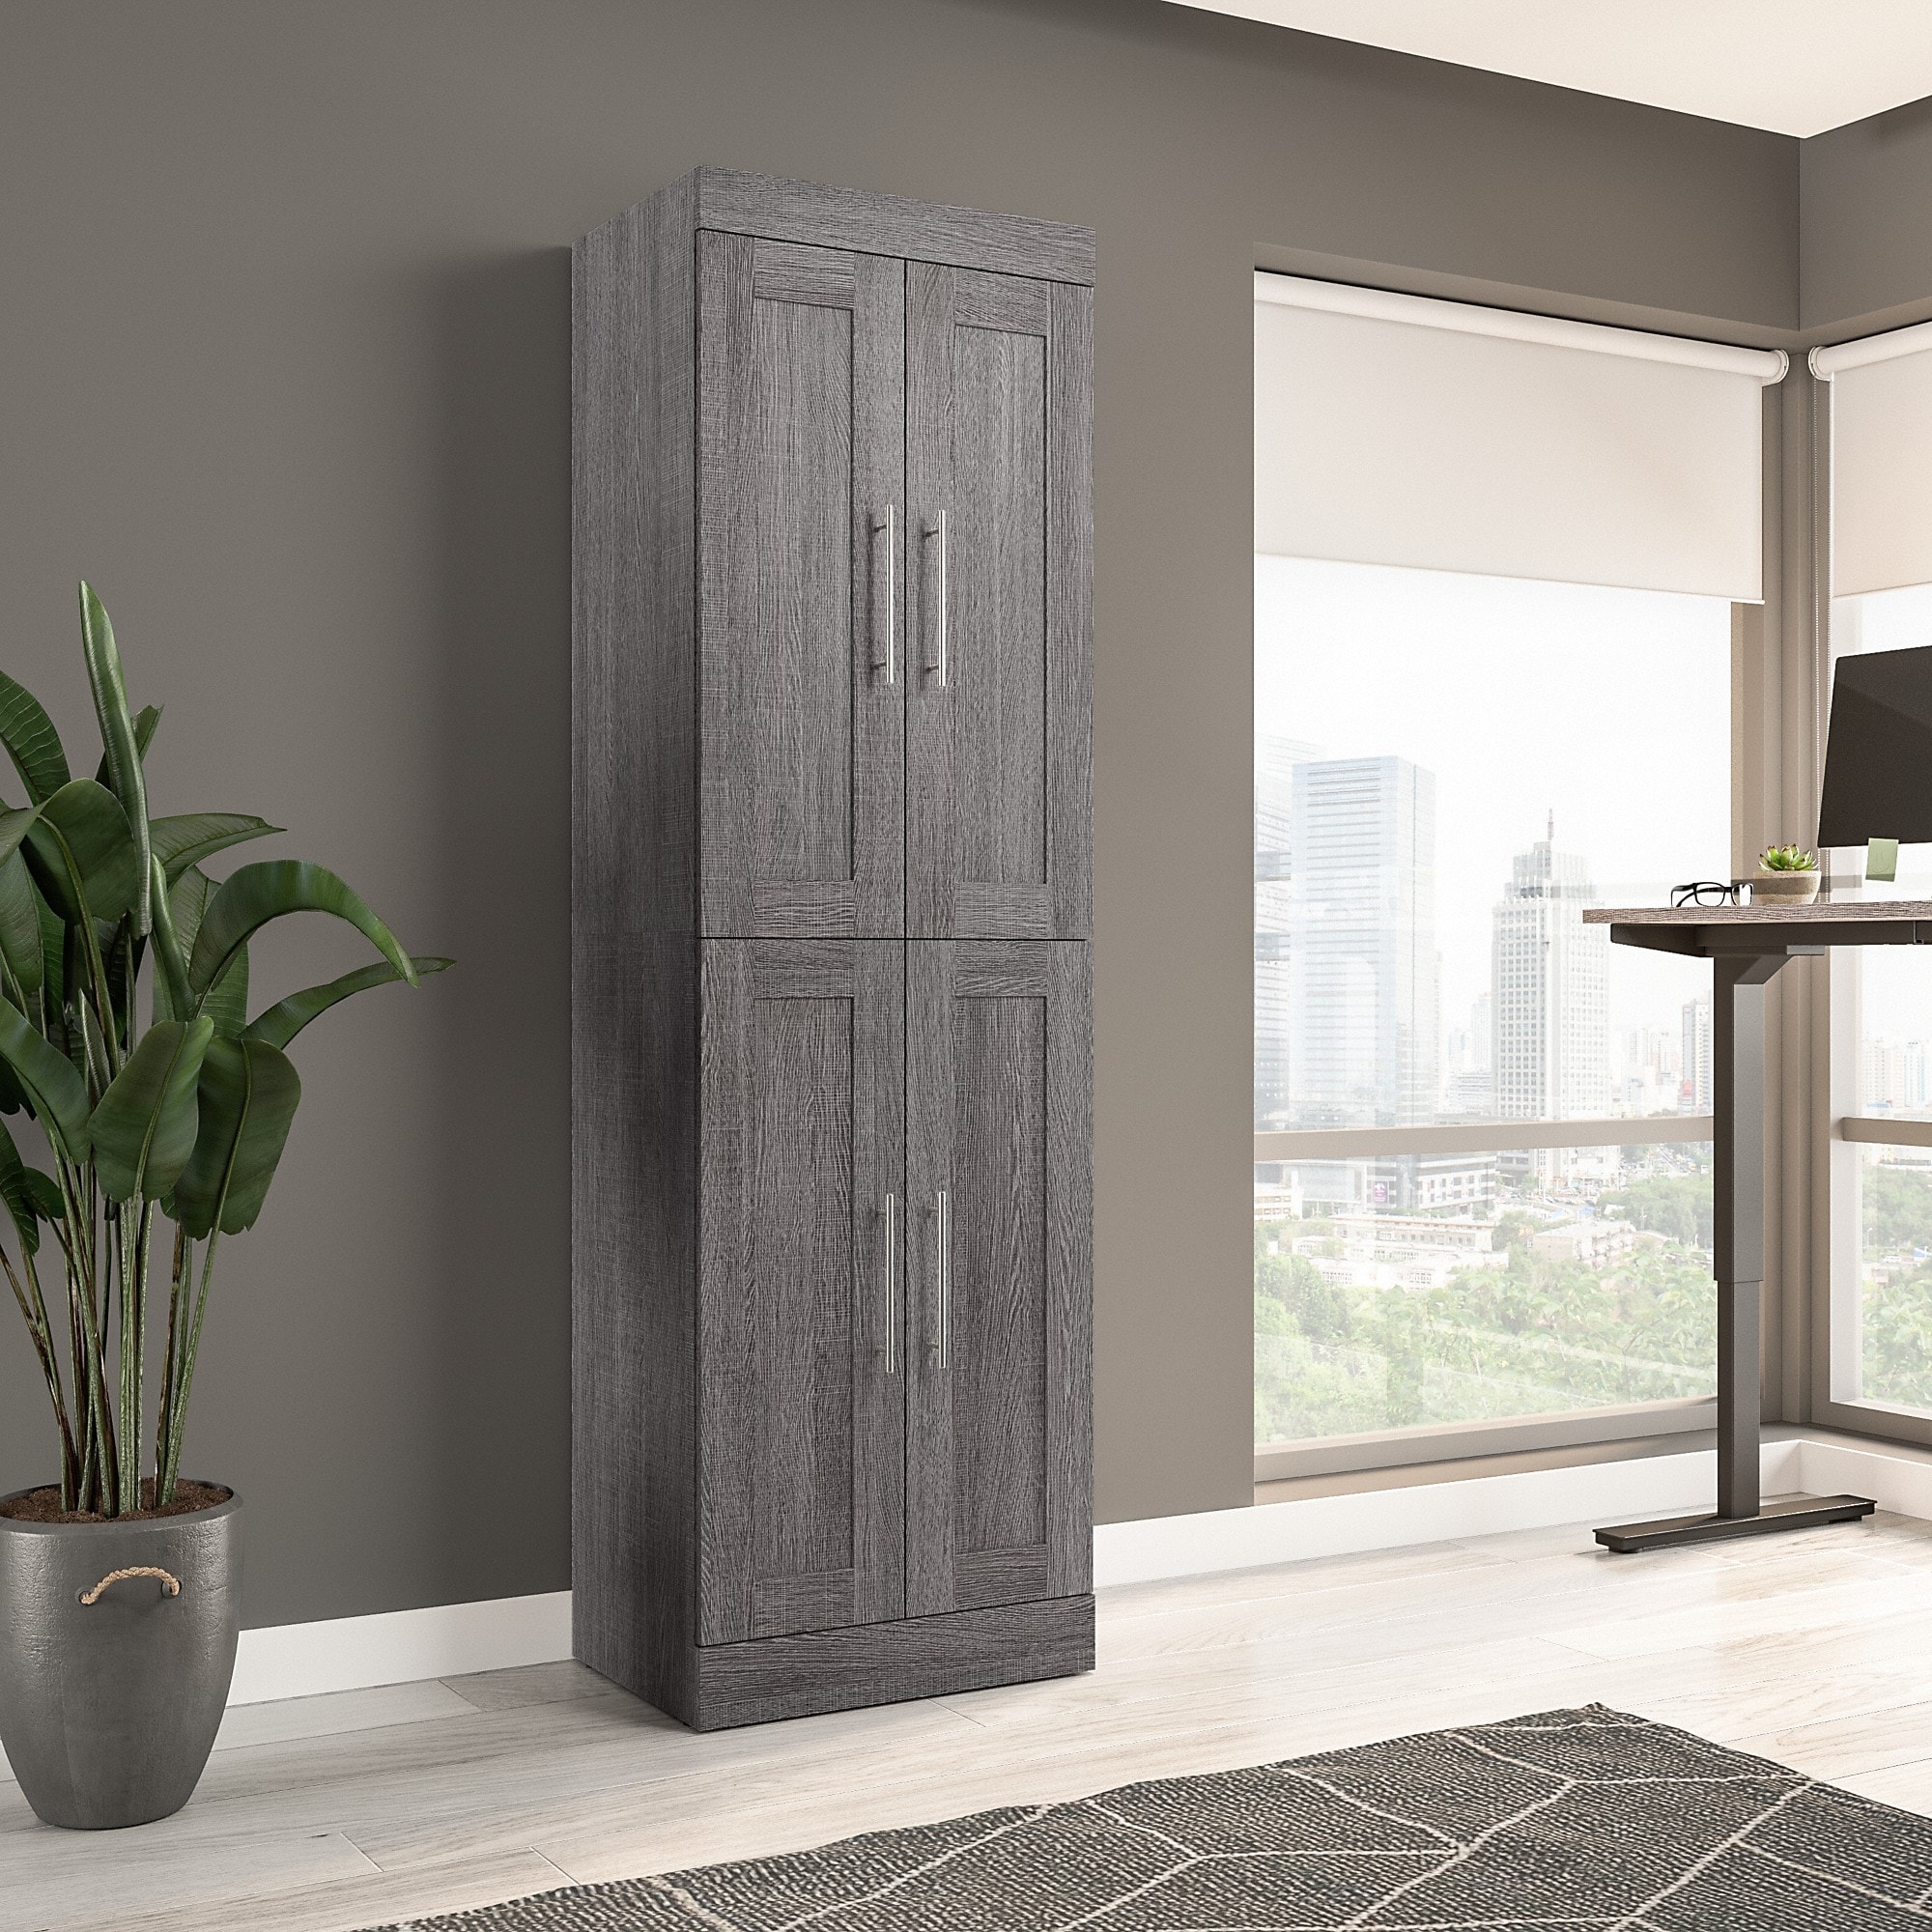 https://ak1.ostkcdn.com/images/products/is/images/direct/1ae3c976db69c0dea927775a112cf723eb1a2bd2/Pur-25W-Closet-Storage-Cabinet-by-Bestar.jpg